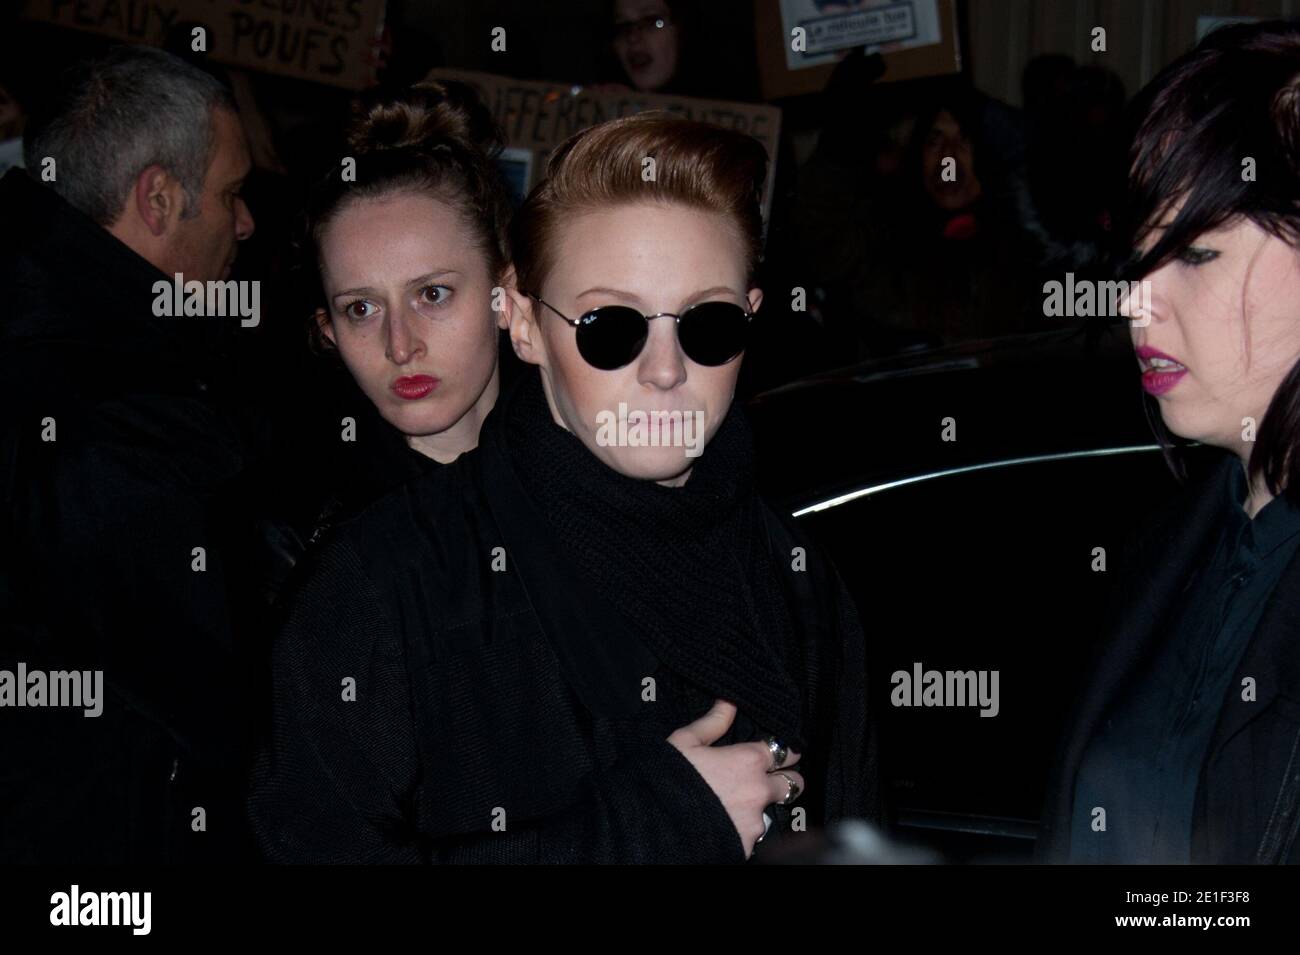 British singer Eleanor "Elly" Jackson alias La Roux attends the Jean-Paul  Gaultier Ready to Wear Autumn/Winter 2011/2012 show, during Paris Fashion  Week show in Paris, France on March 5, 2011. Photo by